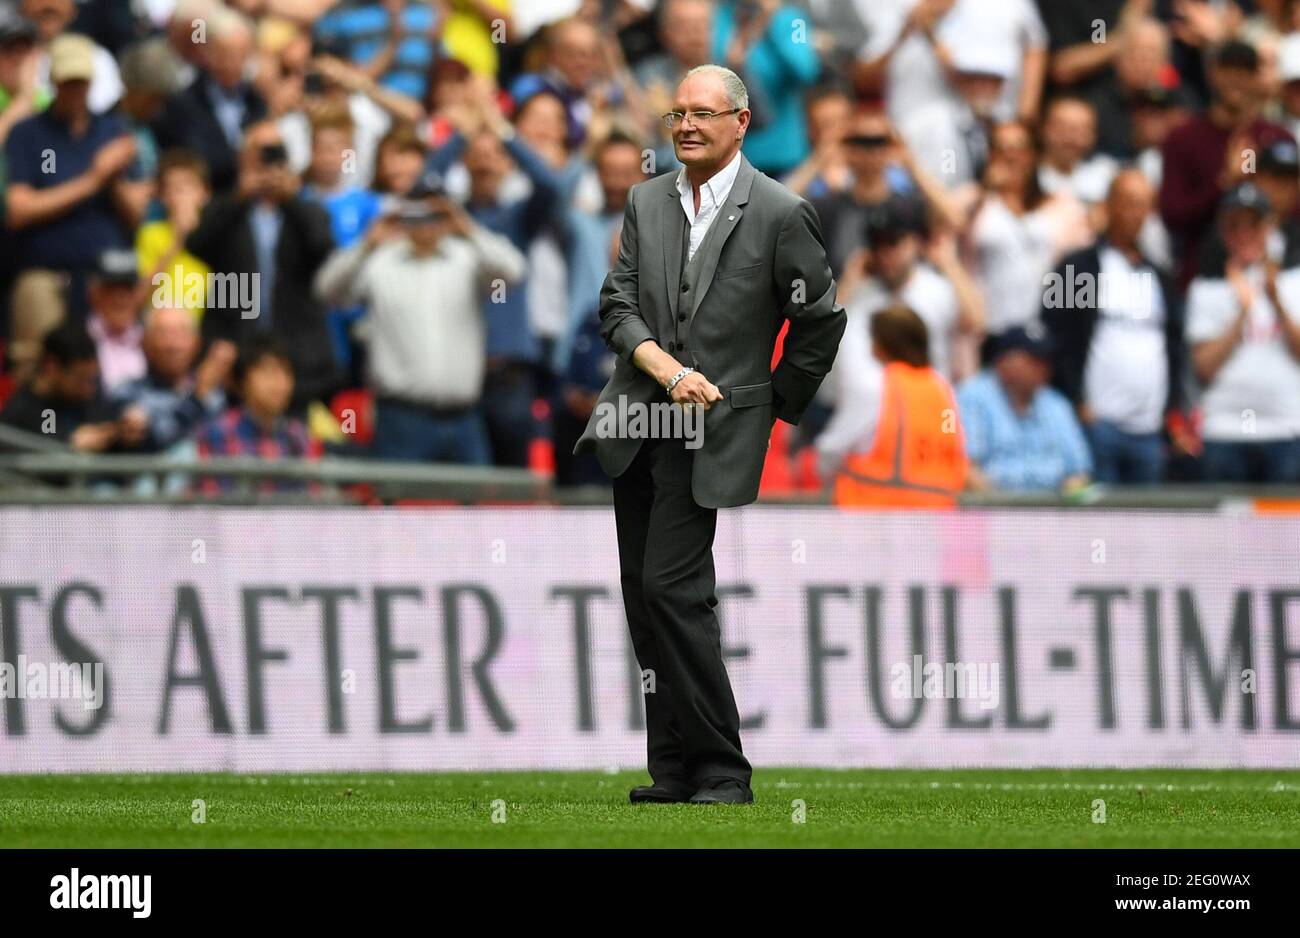 Soccer Football - Premier League - Tottenham Hotspur vs Leicester City - Wembley Stadium, London, Britain - May 13, 2018     Former Tottenham player Paul Gascoigne on the pitch at half time     REUTERS/Dylan Martinez        EDITORIAL USE ONLY. No use with unauthorized audio, video, data, fixture lists, club/league logos or 'live' services. Online in-match use limited to 75 images, no video emulation. No use in betting, games or single club/league/player publications.  Please contact your account representative for further details. Stock Photo